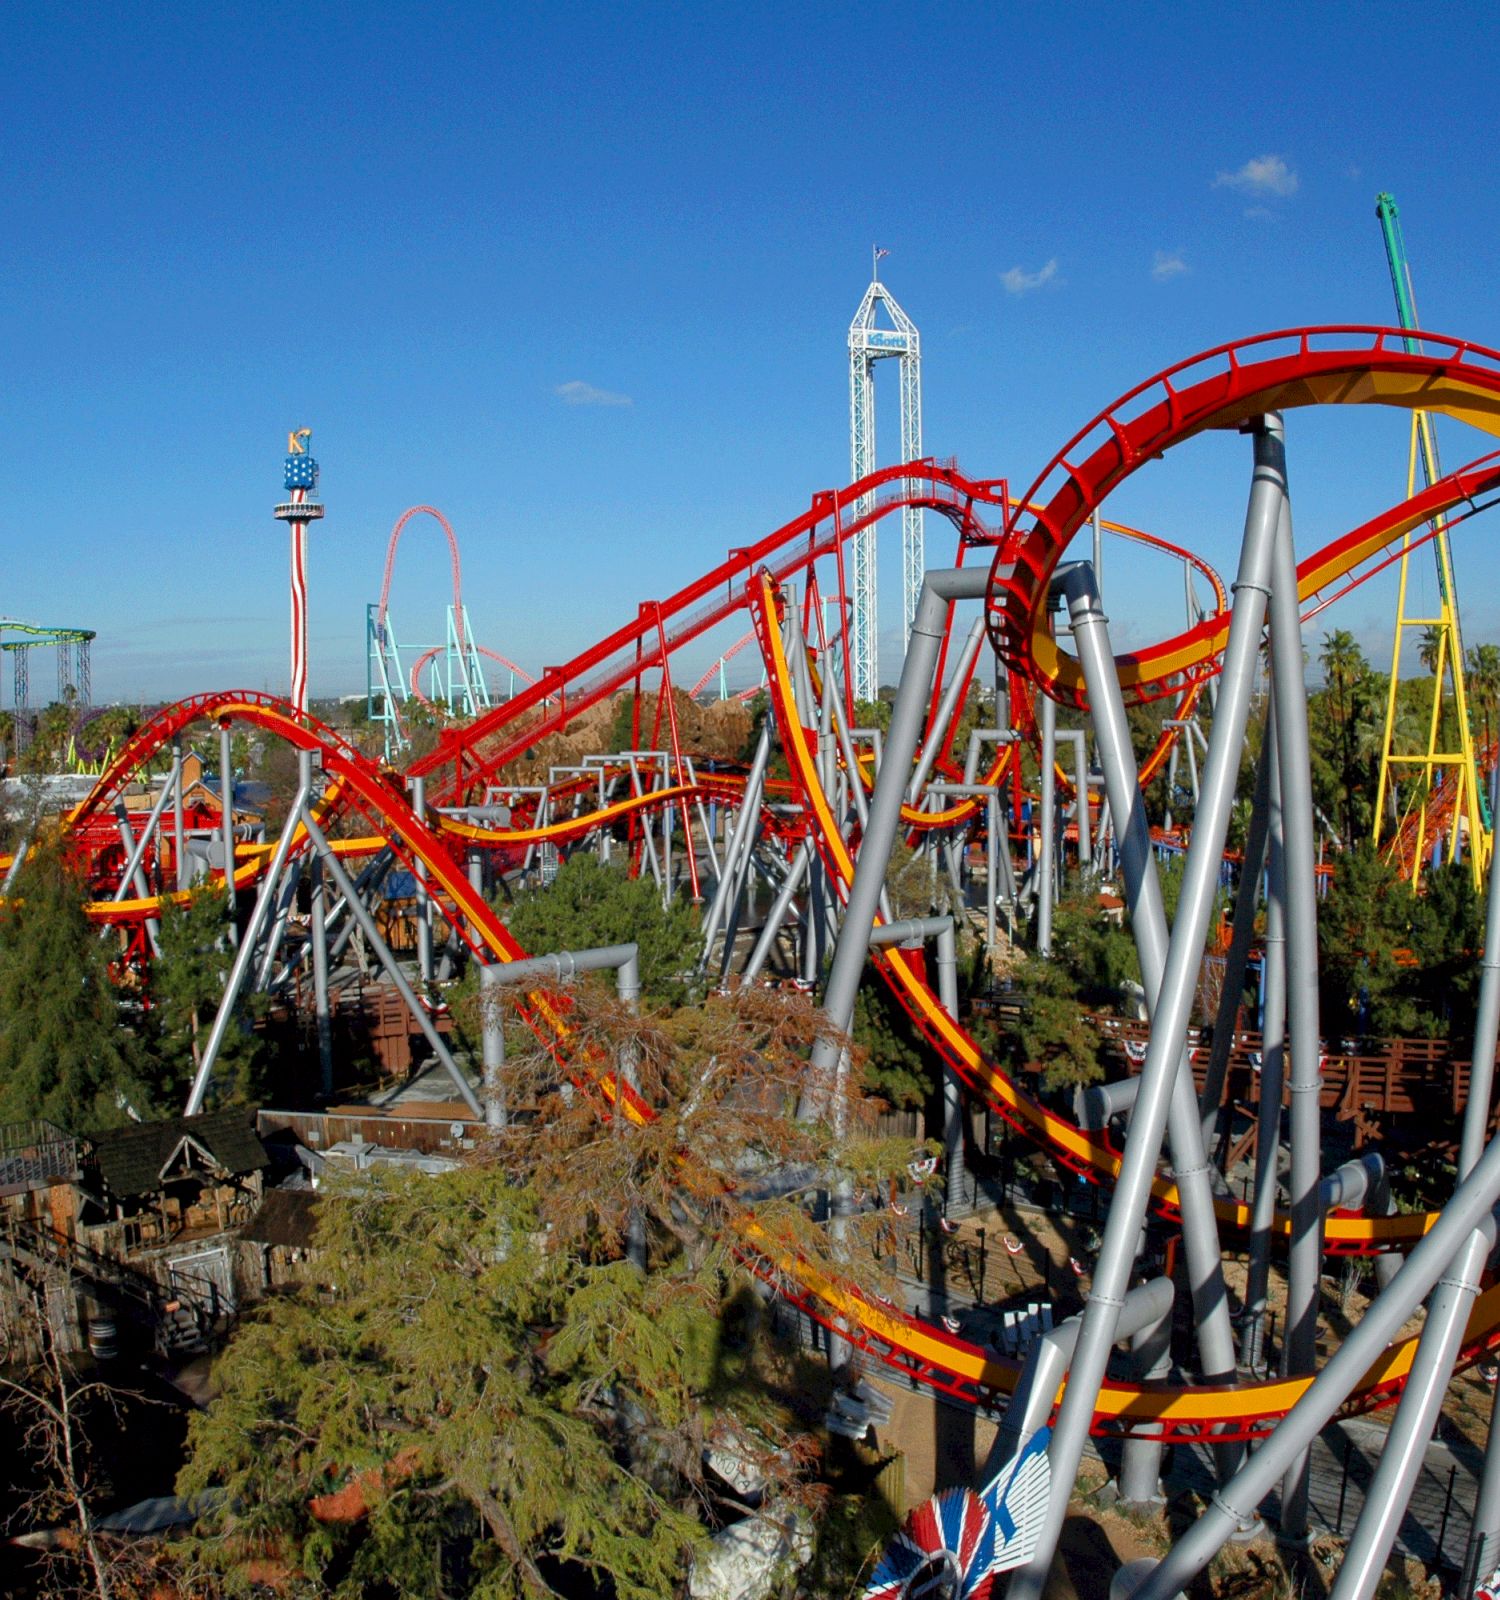 The image shows a vibrant amusement park with several roller coasters, including a prominent red and yellow one, surrounded by greenery and other attractions.